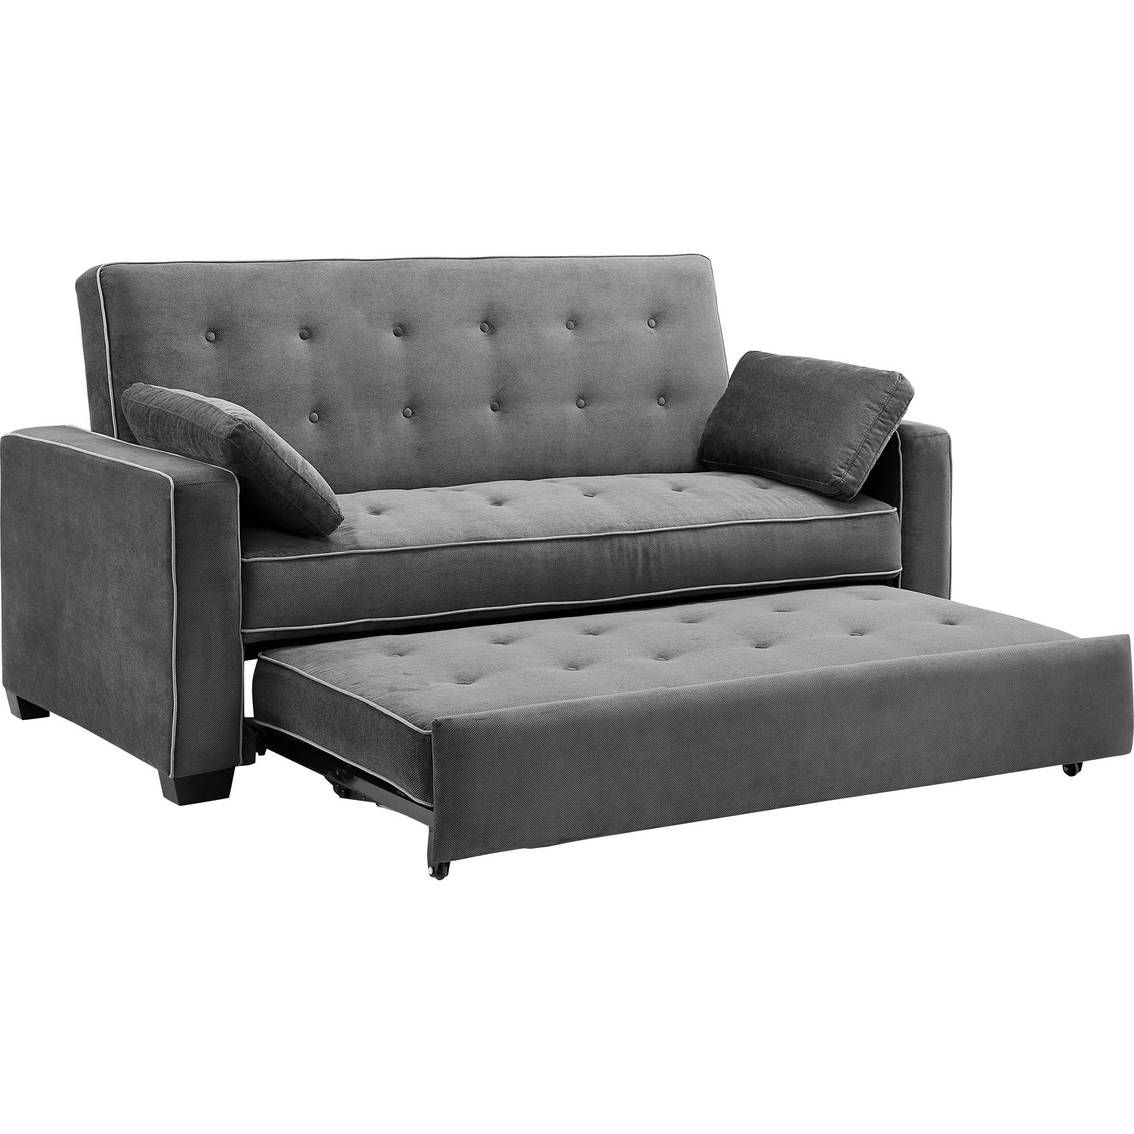 Serta Augustine Convertible Queen Size Sleeper Sofa | Serta With Queen Convertible Sofas (View 2 of 15)